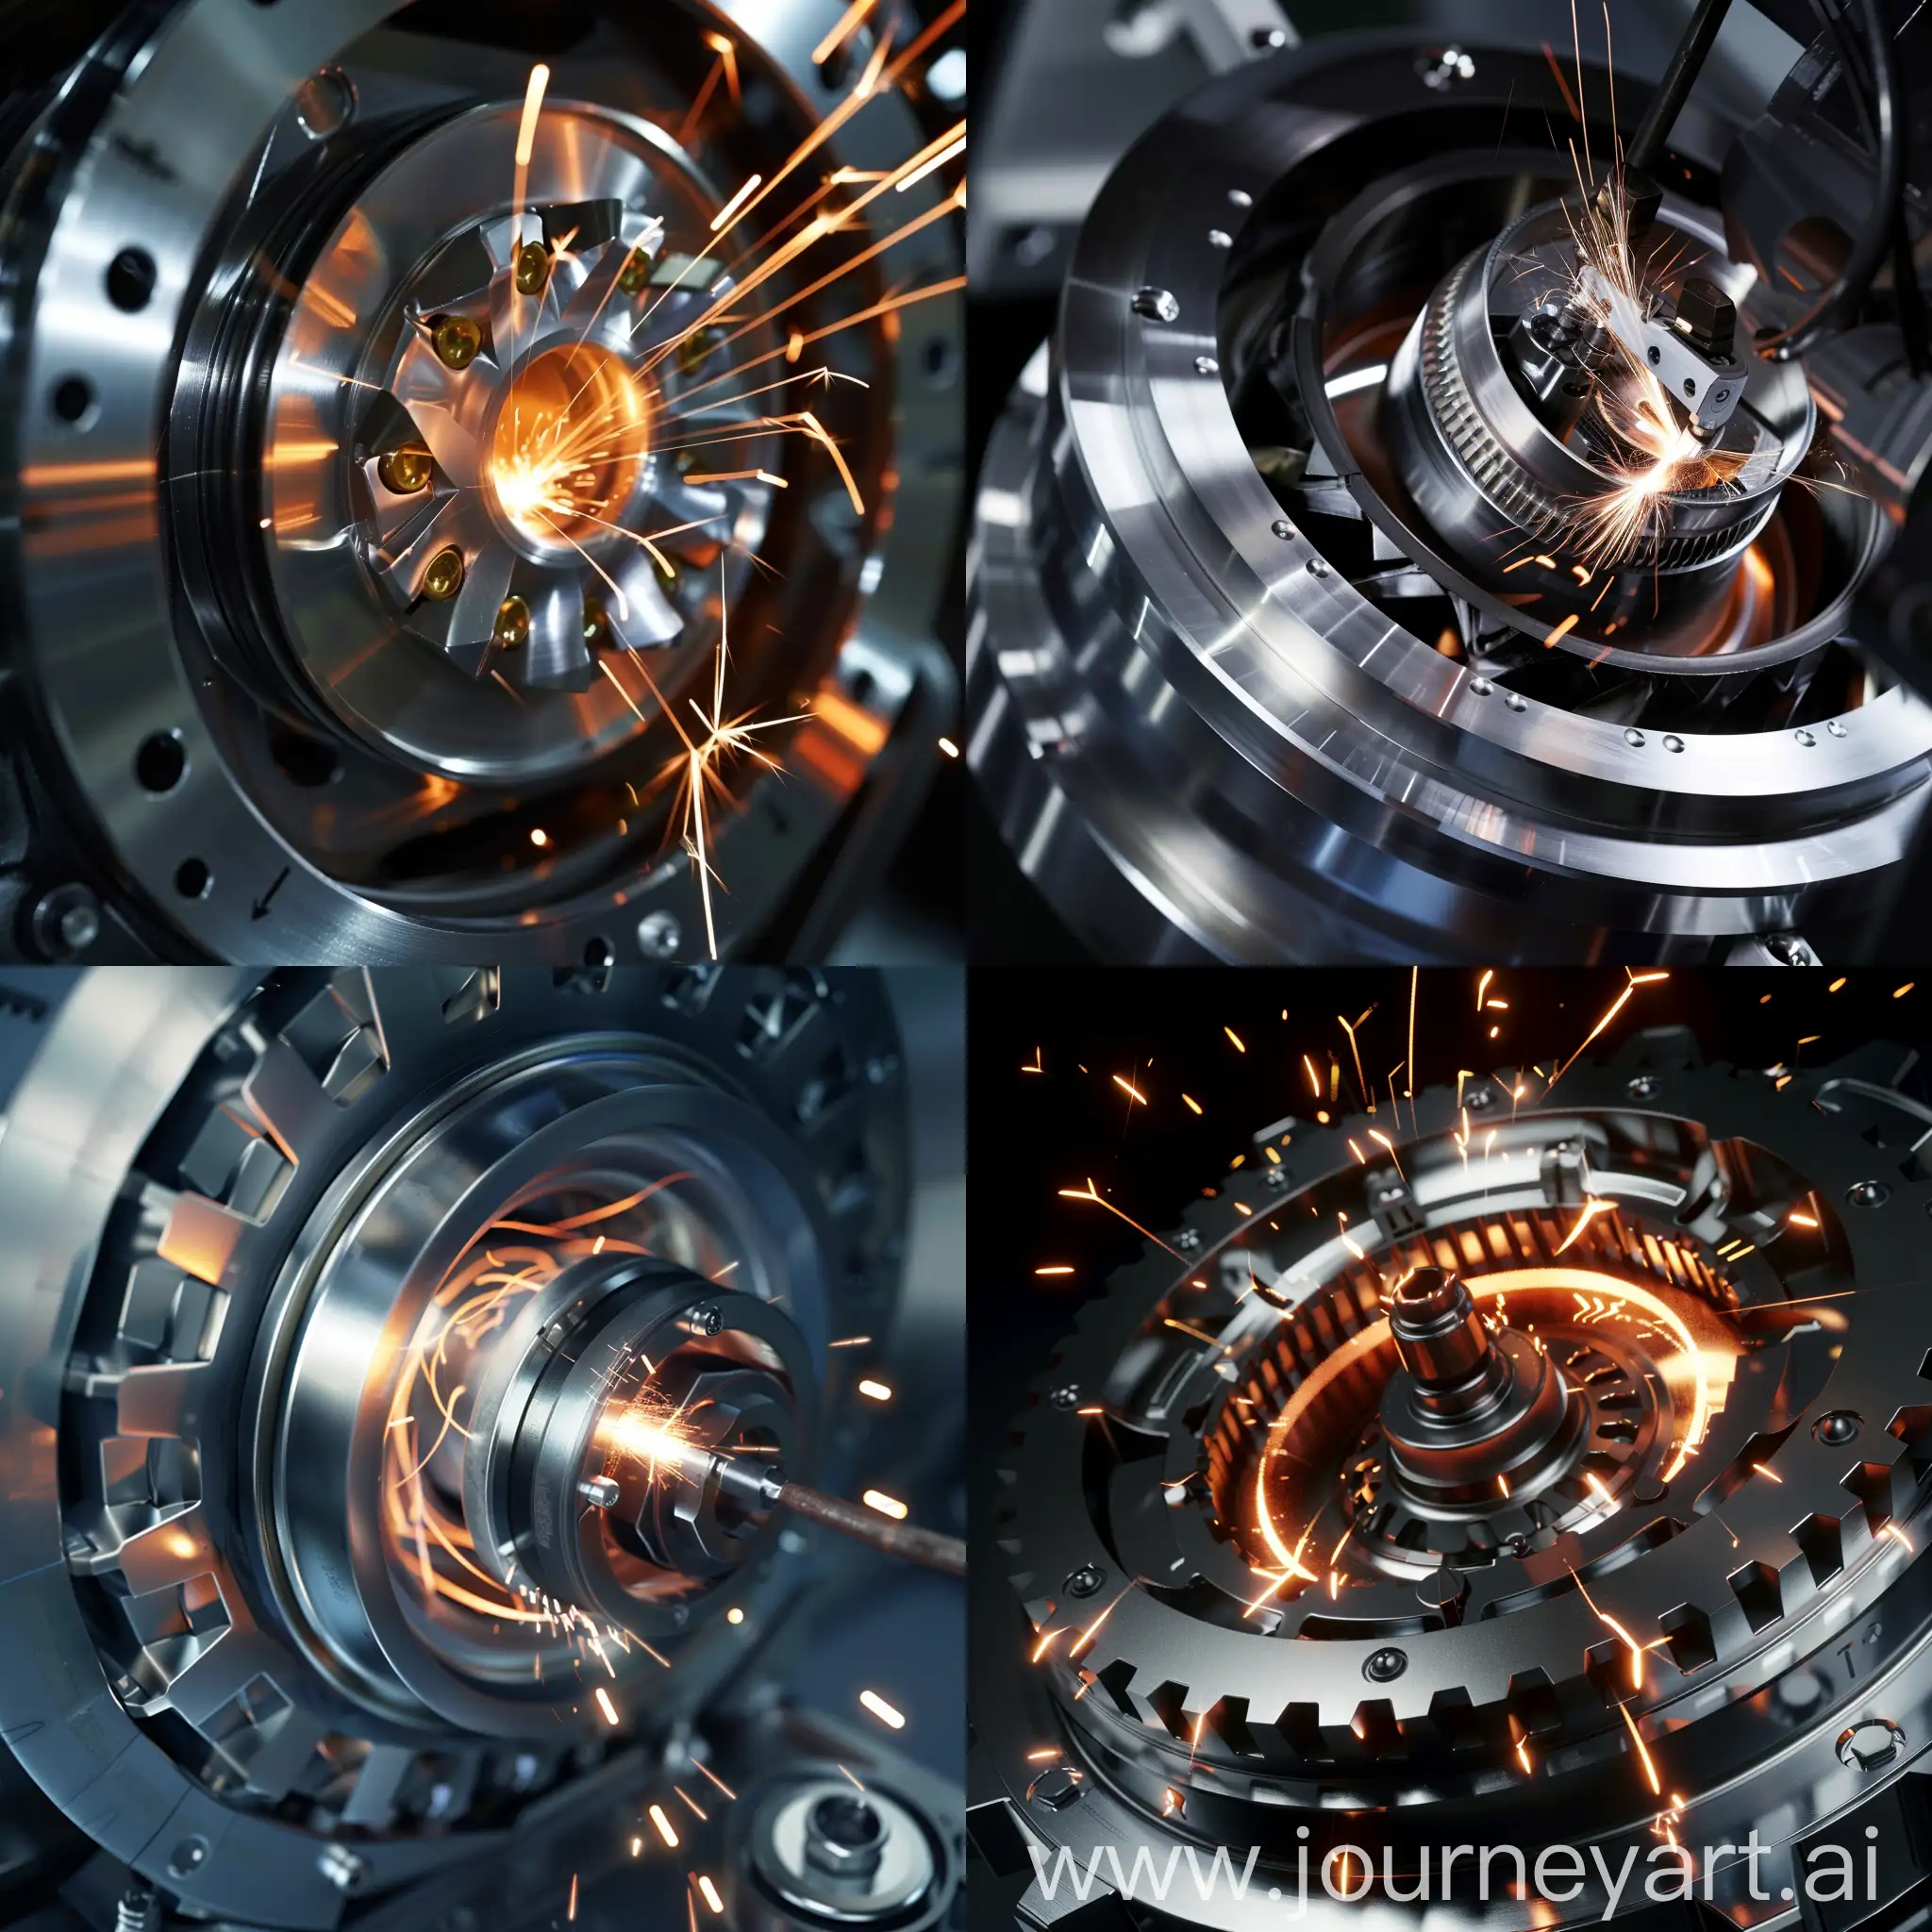 Rotary-Engine-in-Action-Revealing-the-Spark-of-Internal-Combustion